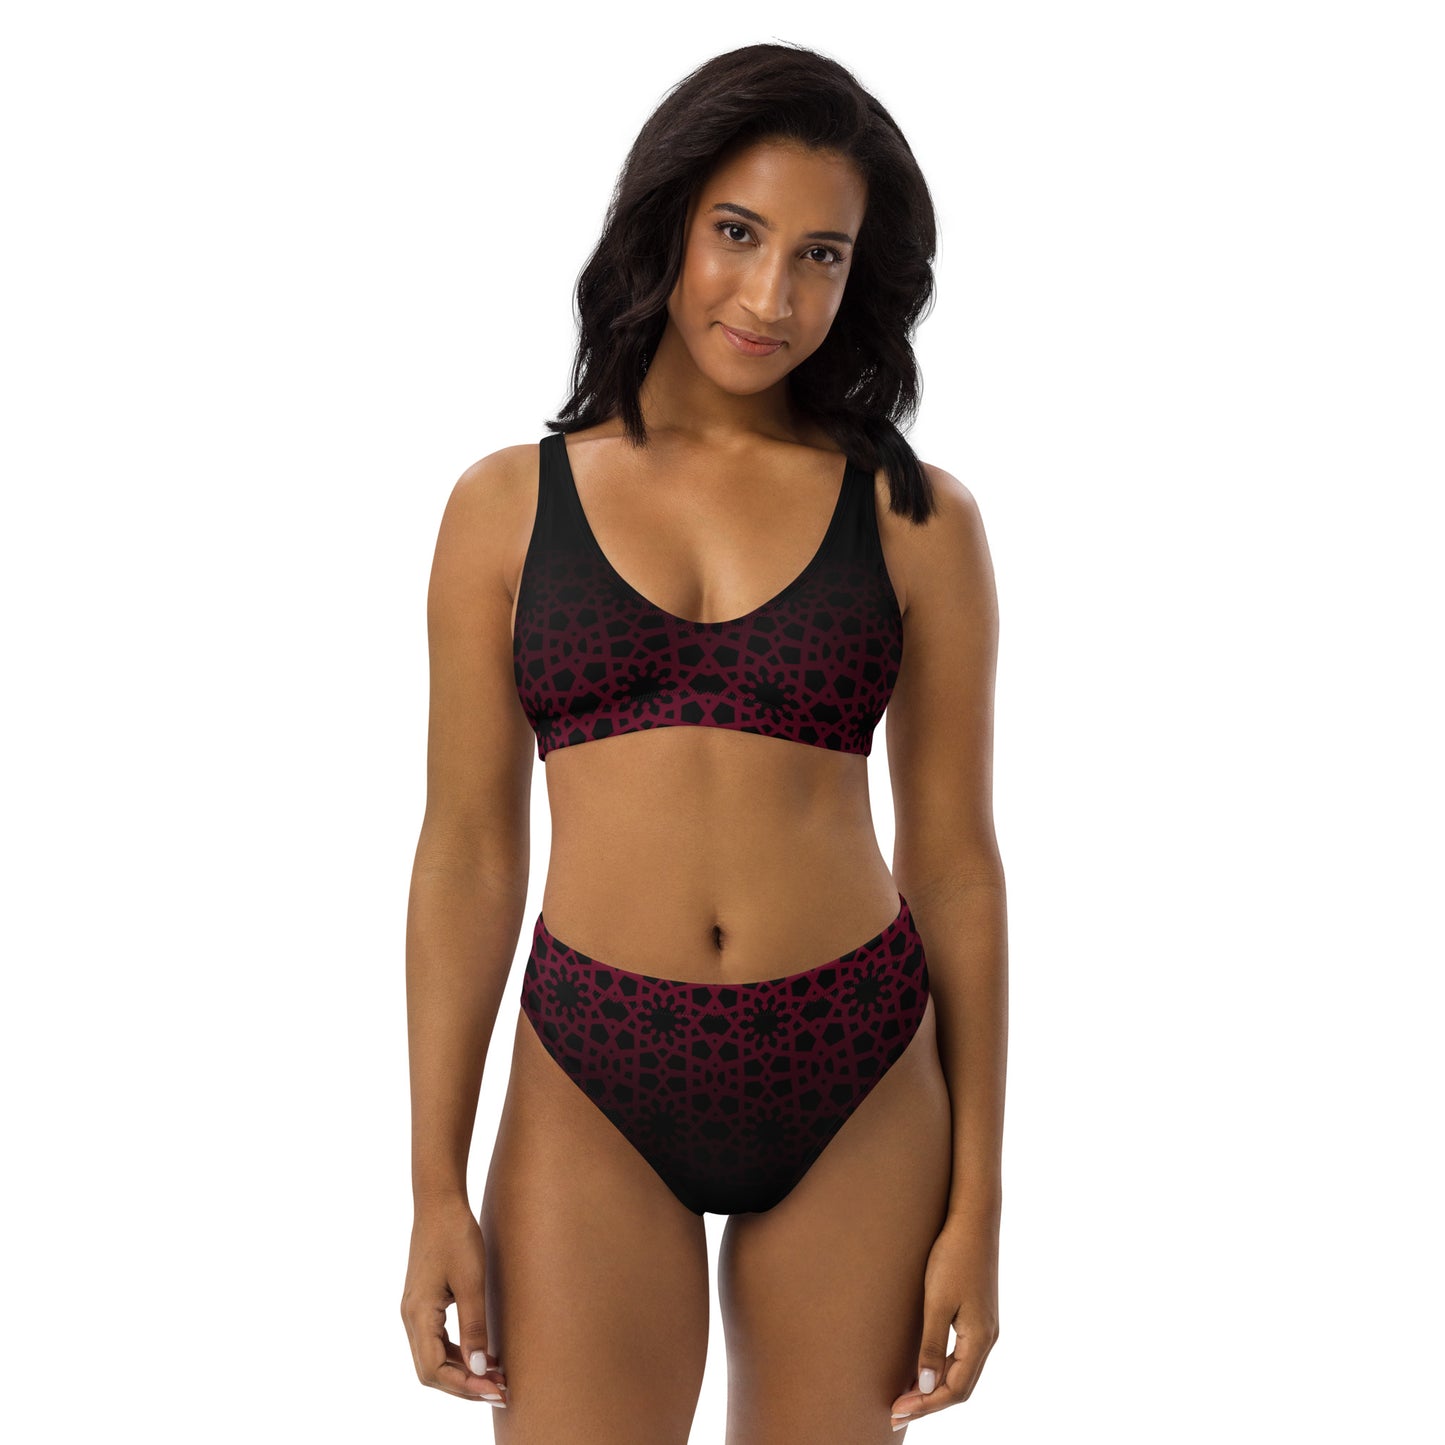 Recycled rPET high-waisted bikini - Geometric Ombre in Black and Red 🍃